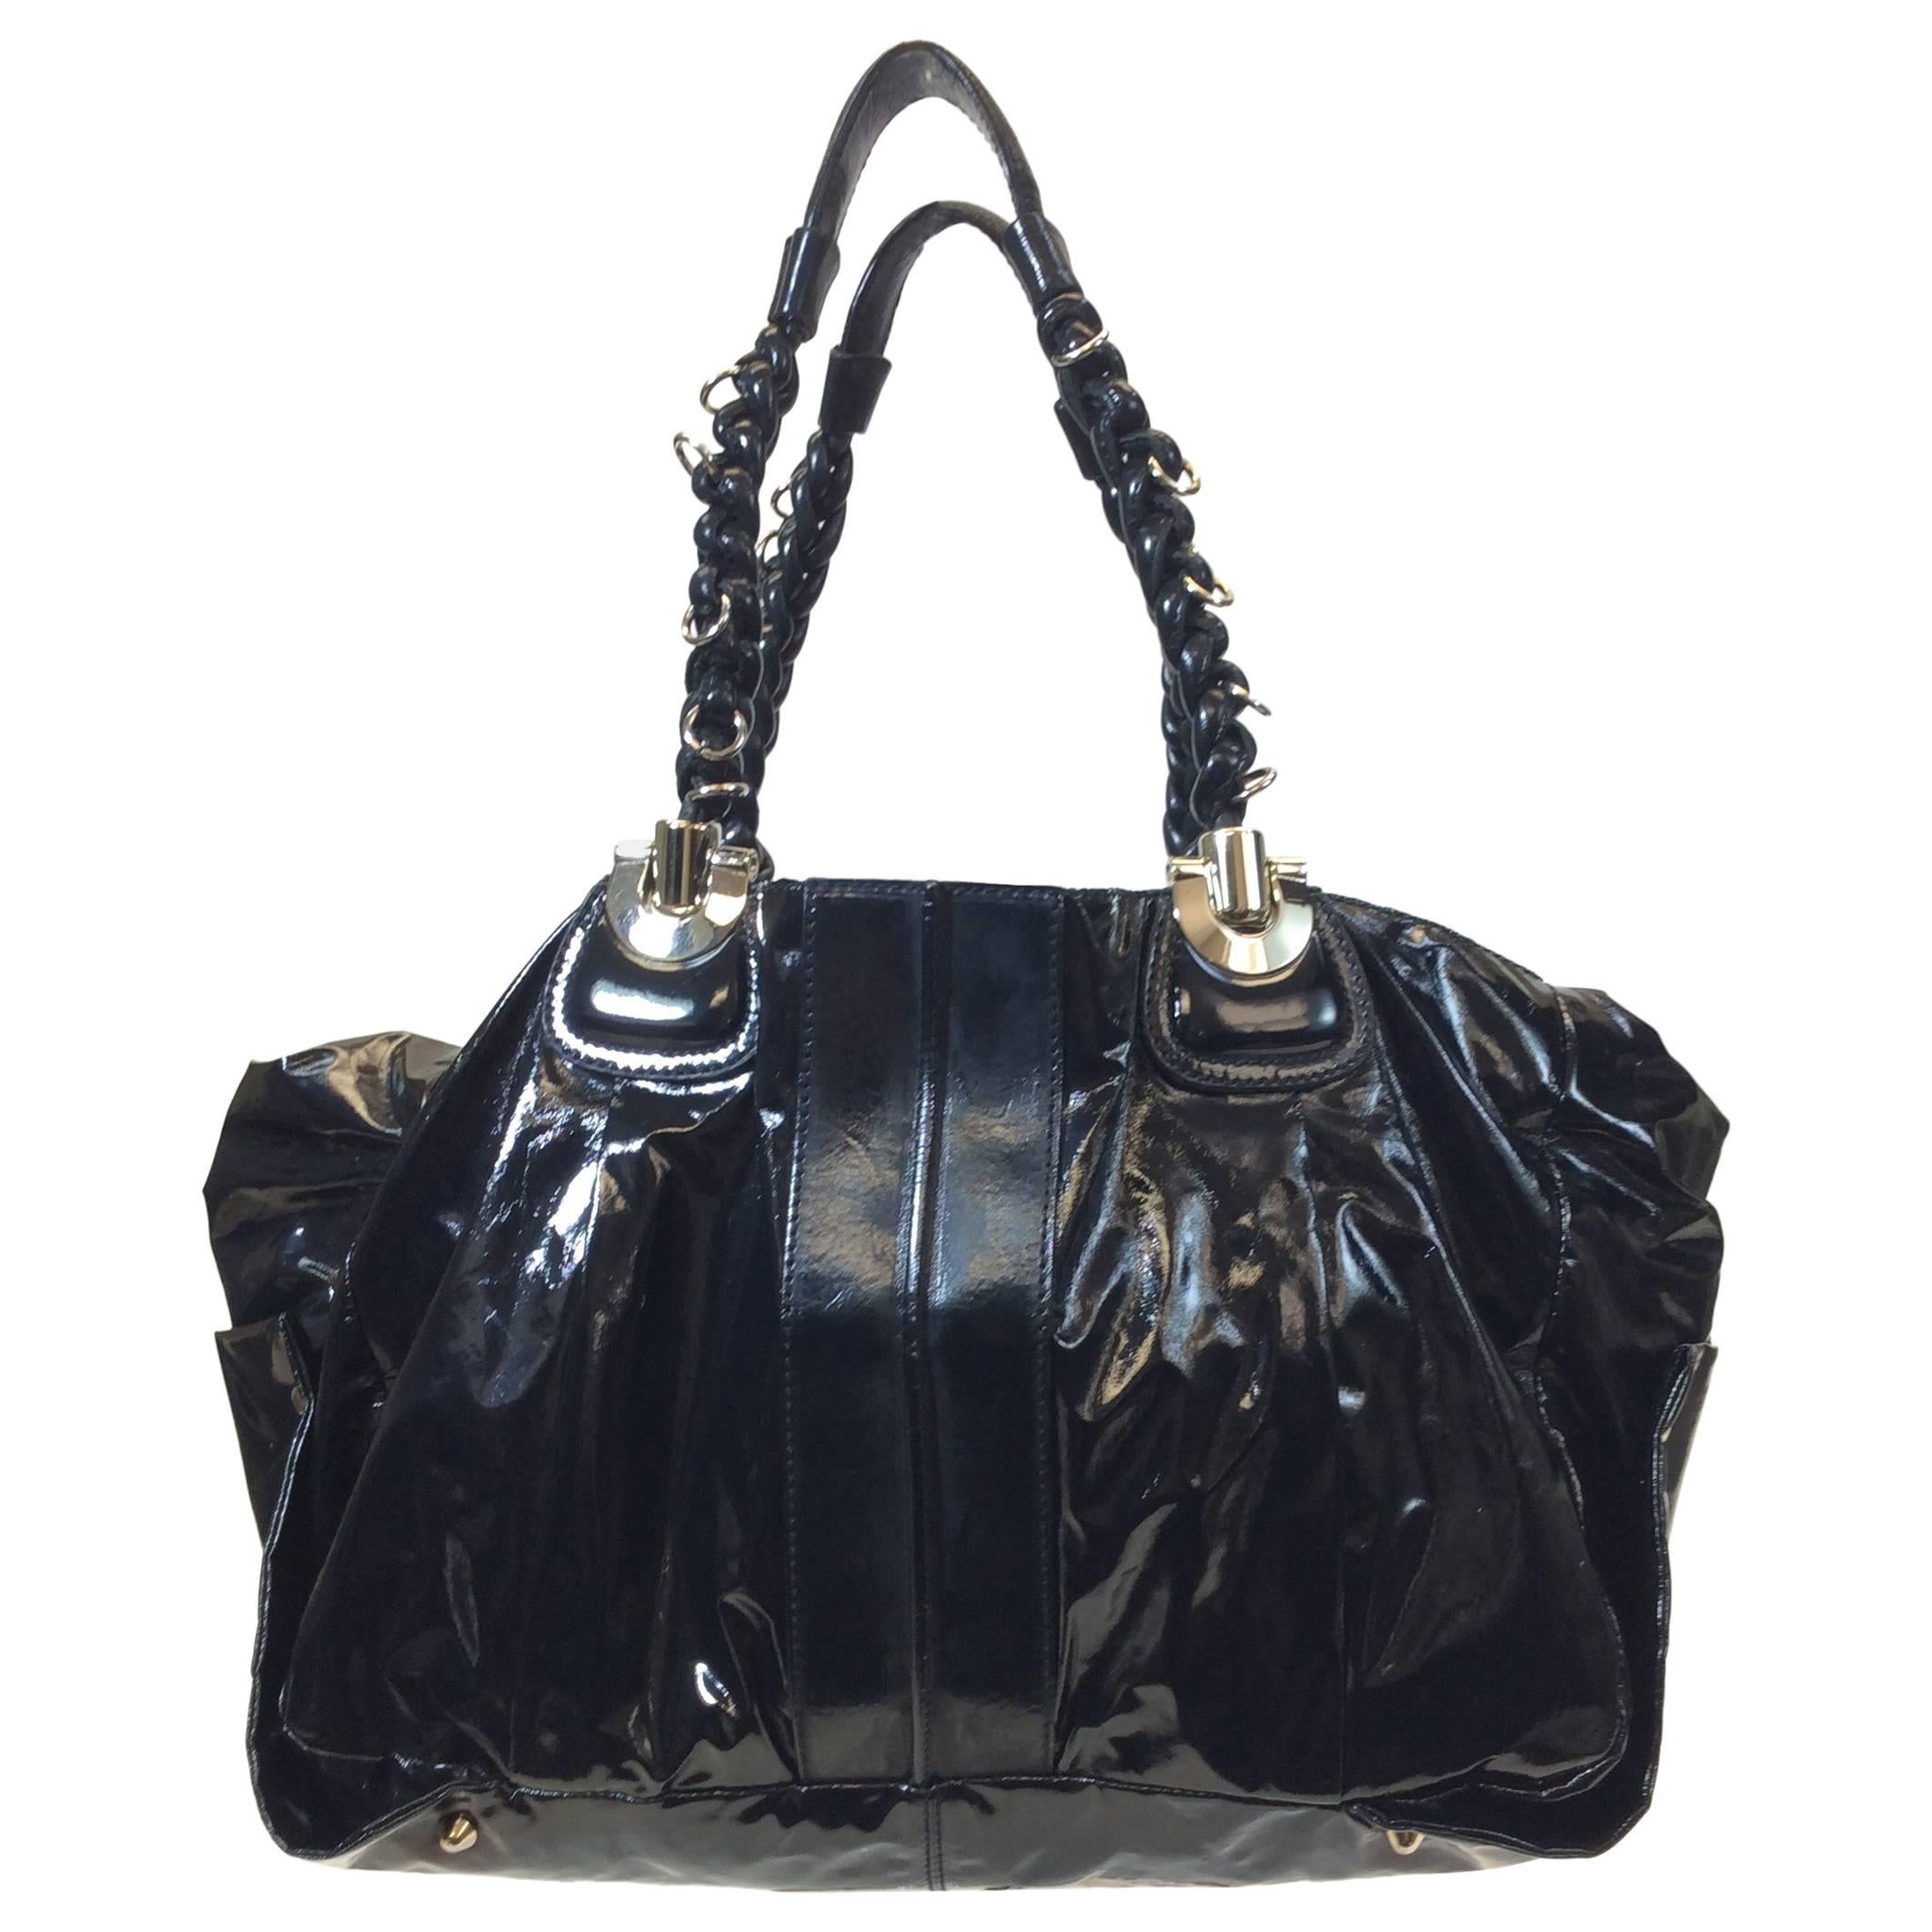 Chloe Black Patent Leather Large Tote Bag For Sale